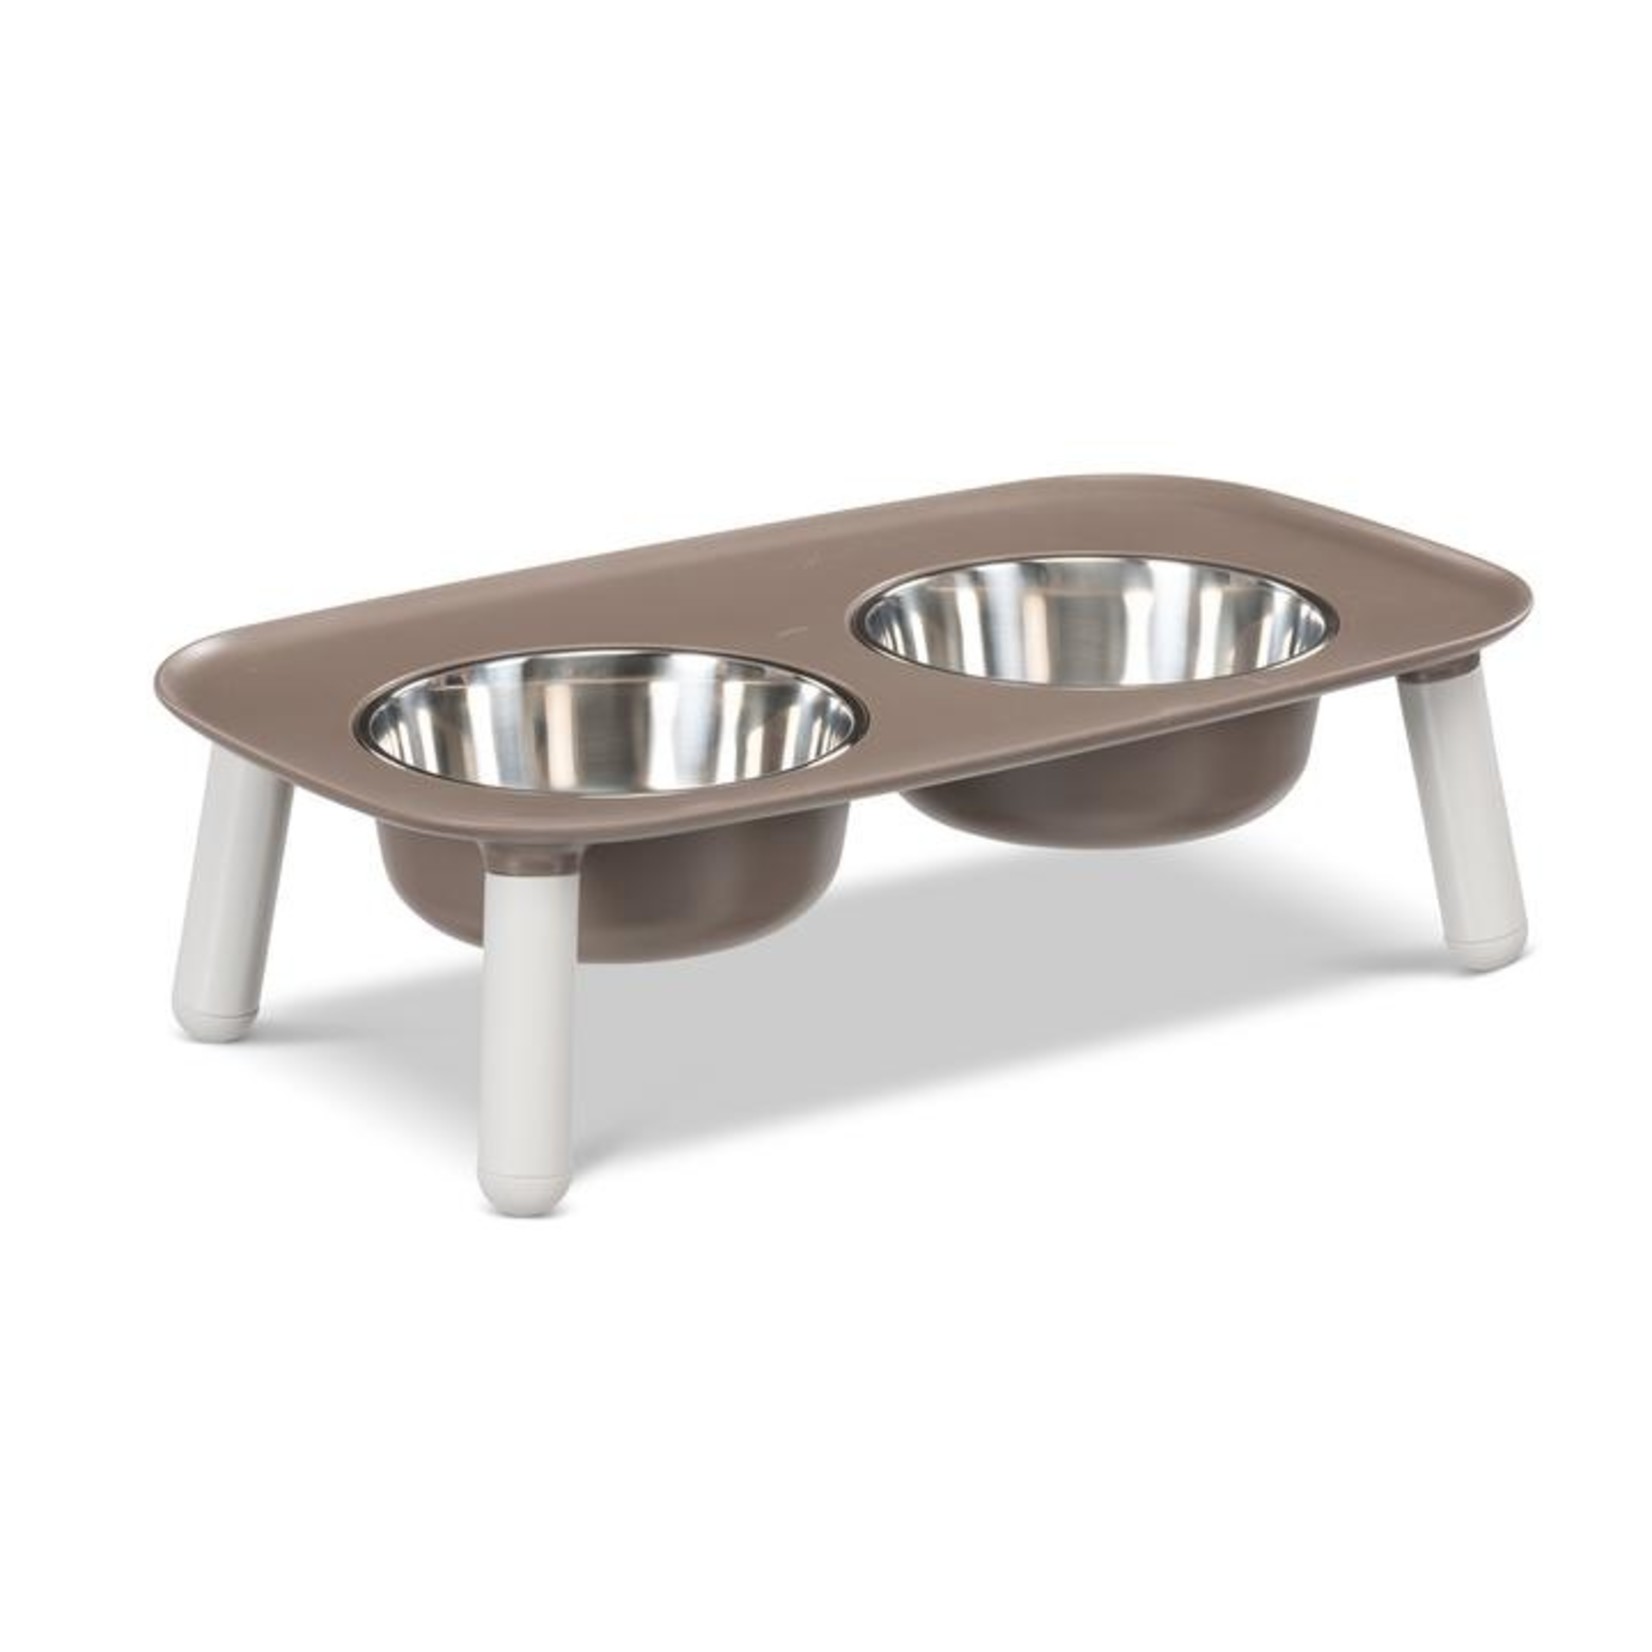 Messy Mutts MESSY MUTTS ELEVATED DOUBLE FEEDER - ADJUSTABLE GRAY